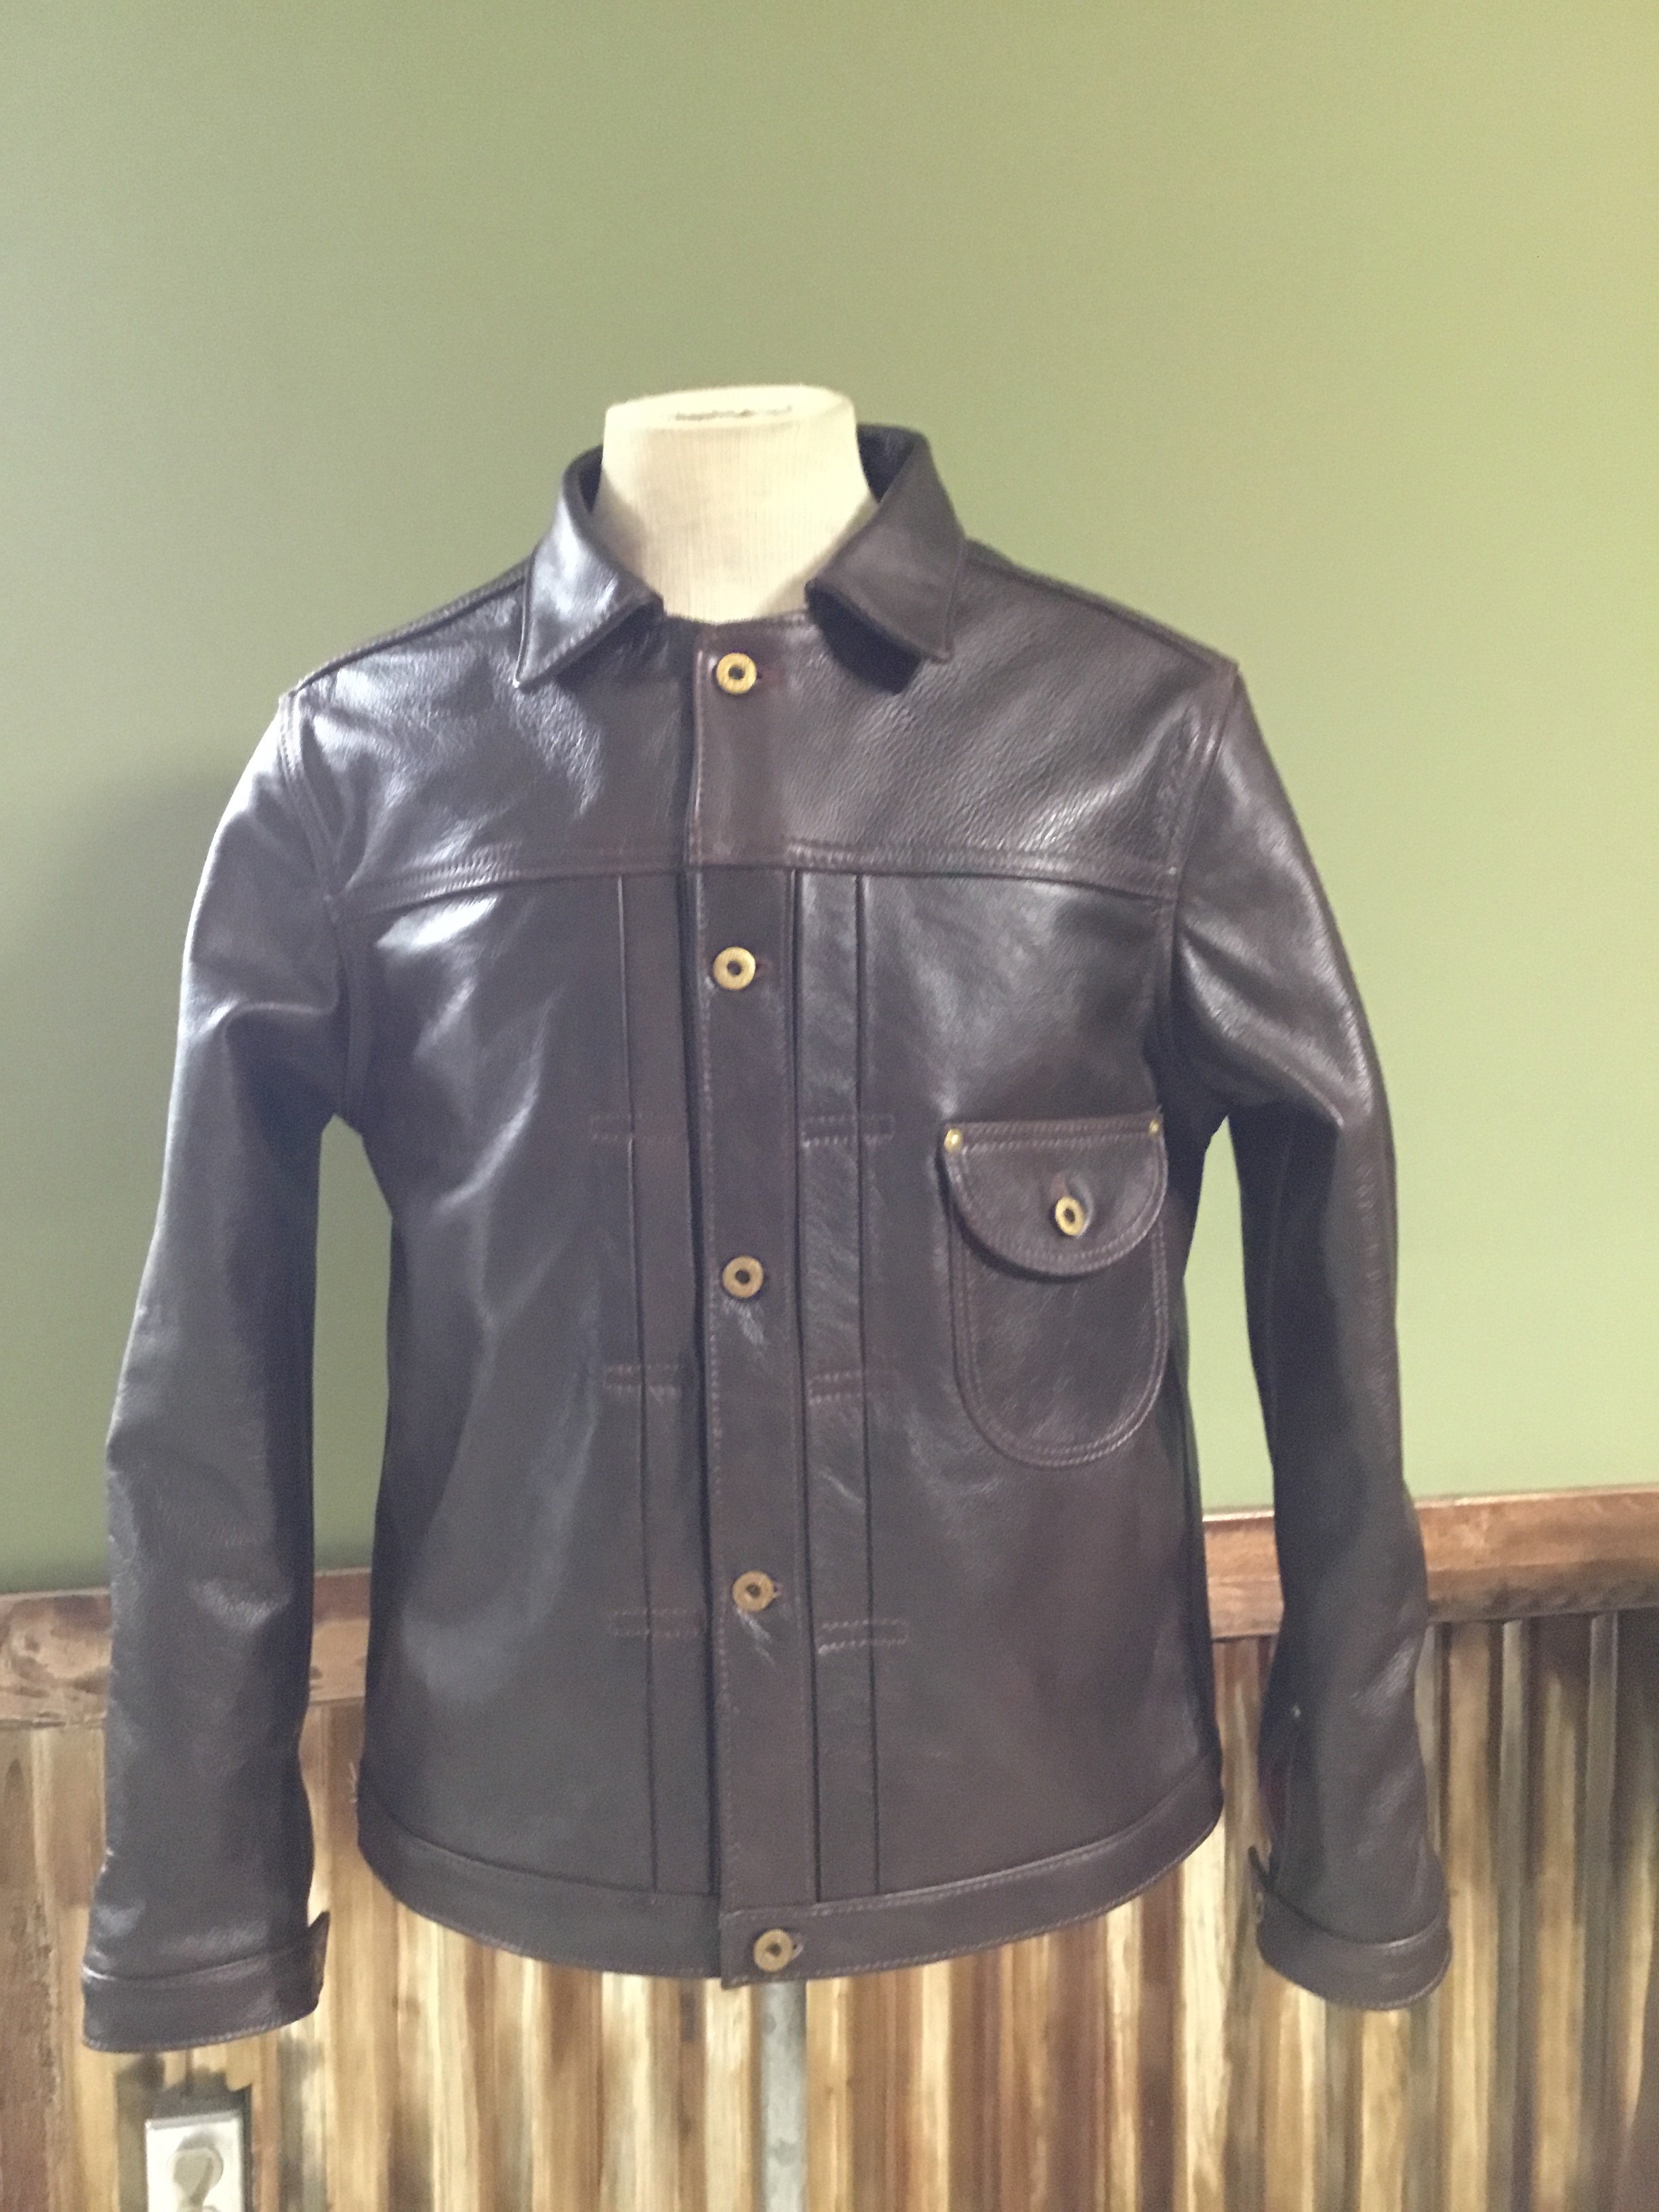 Levi’s in leather | Vintage Leather Jackets Forum